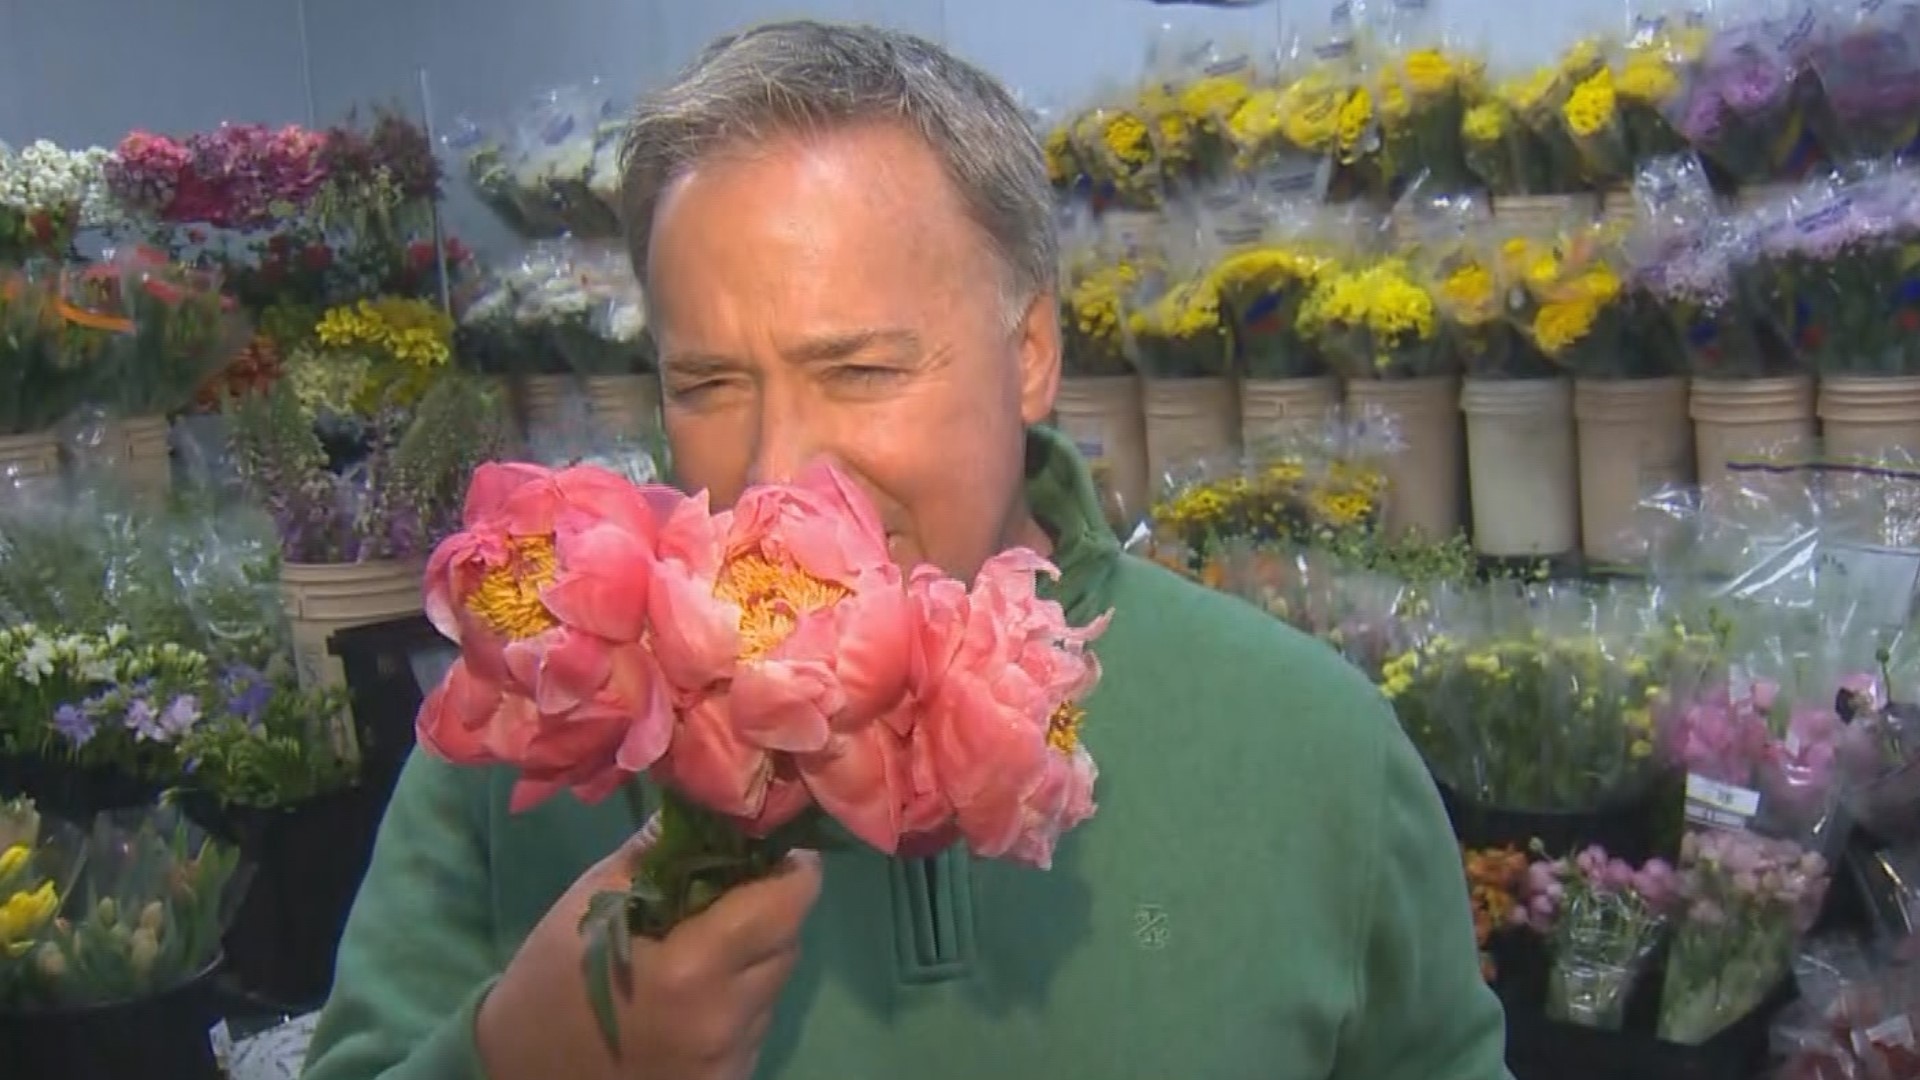 With Mother's Day almost here, KGW Sunrise meteorologist Rod Hill stopped by the Portland Flower Market to see how staff are getting ready for the holiday.